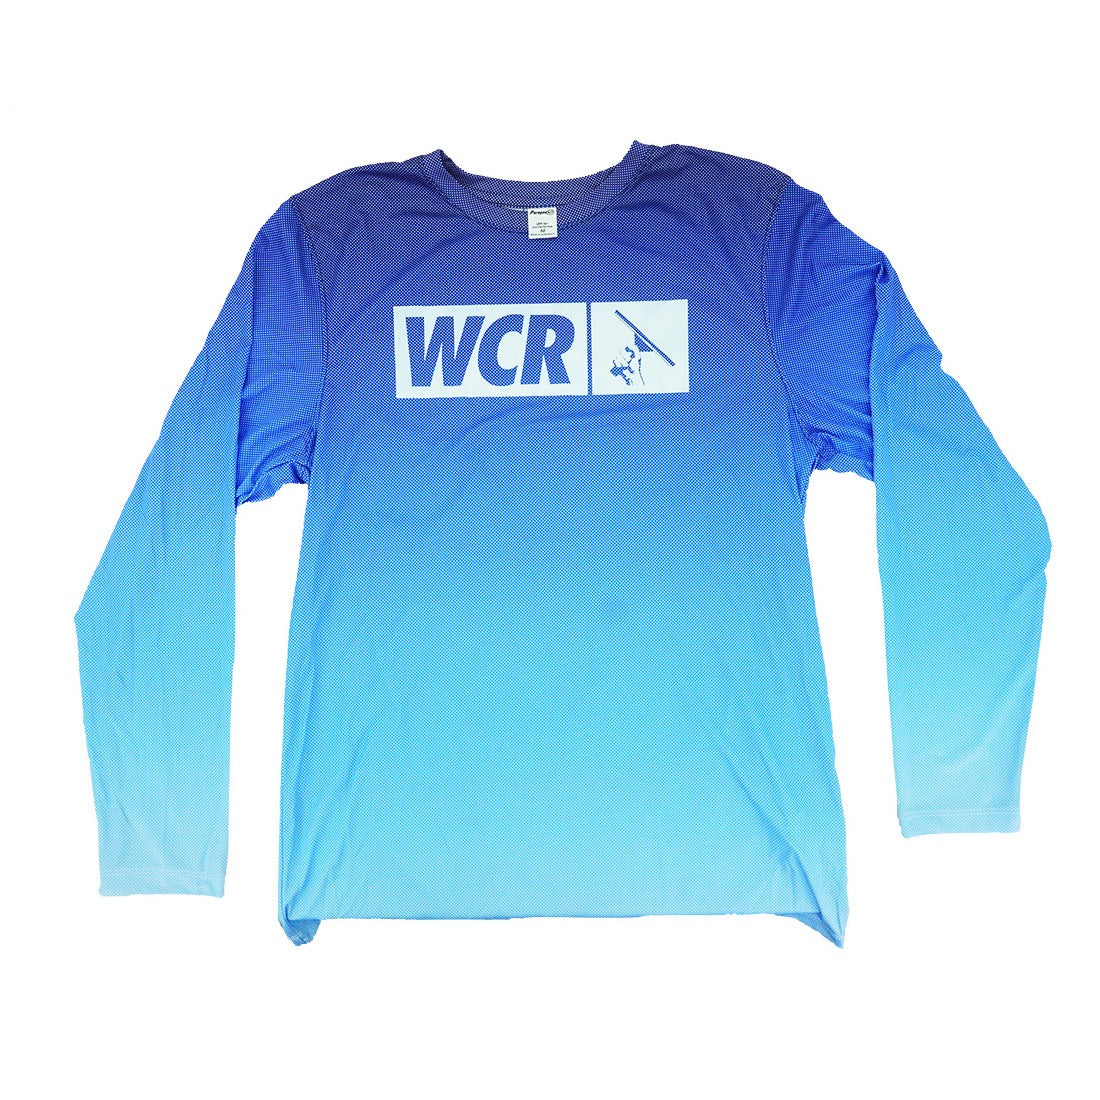 WCR Sunny Shirt Product View